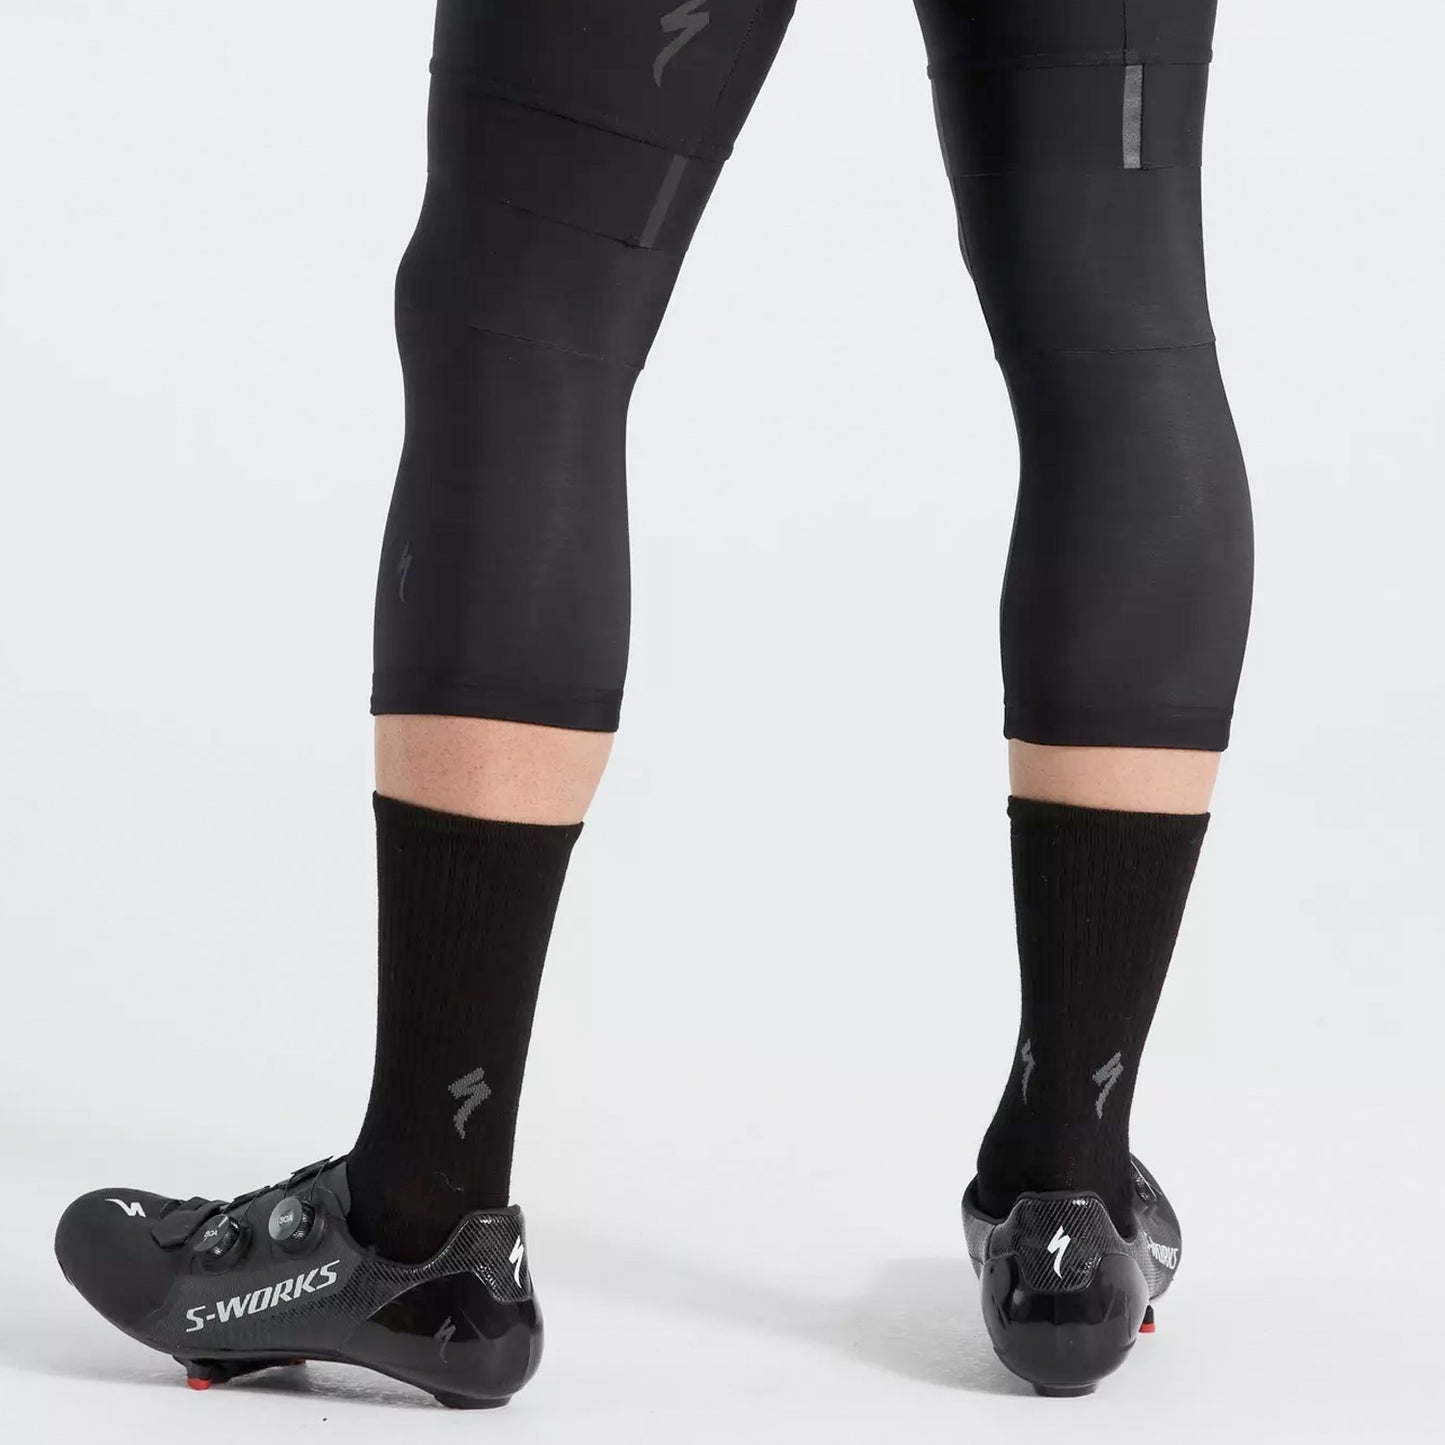 Specialized Unisex Thermal Knee Warmers Black